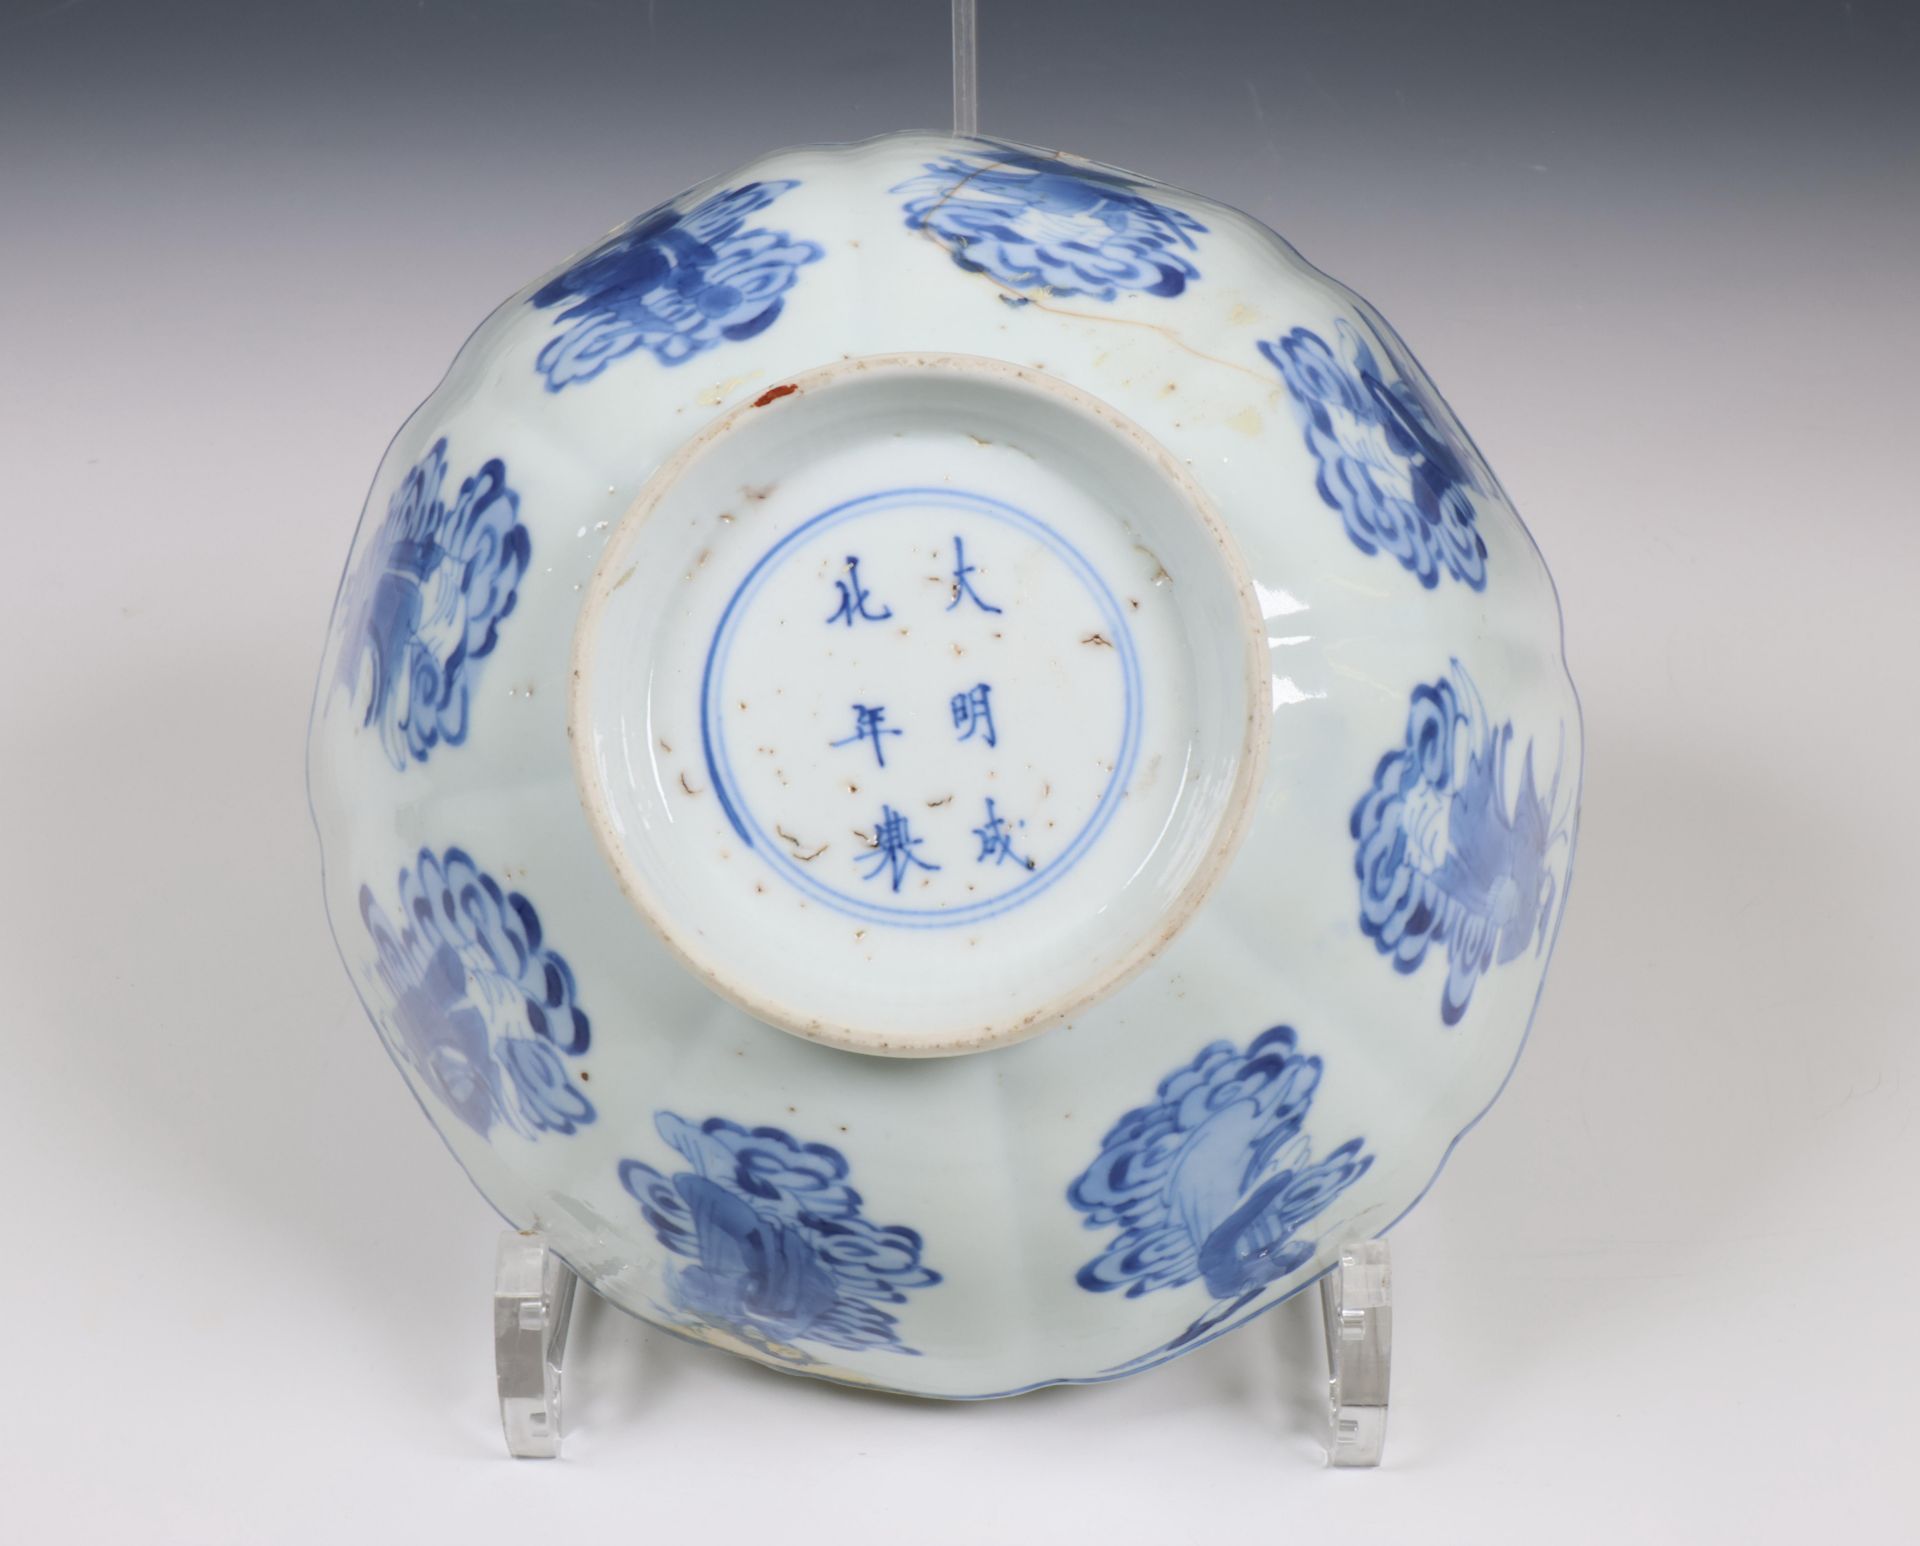 China, blue and white porcelain 'Immortals' bowl, Kangxi period (1662-1722), - Image 6 of 6